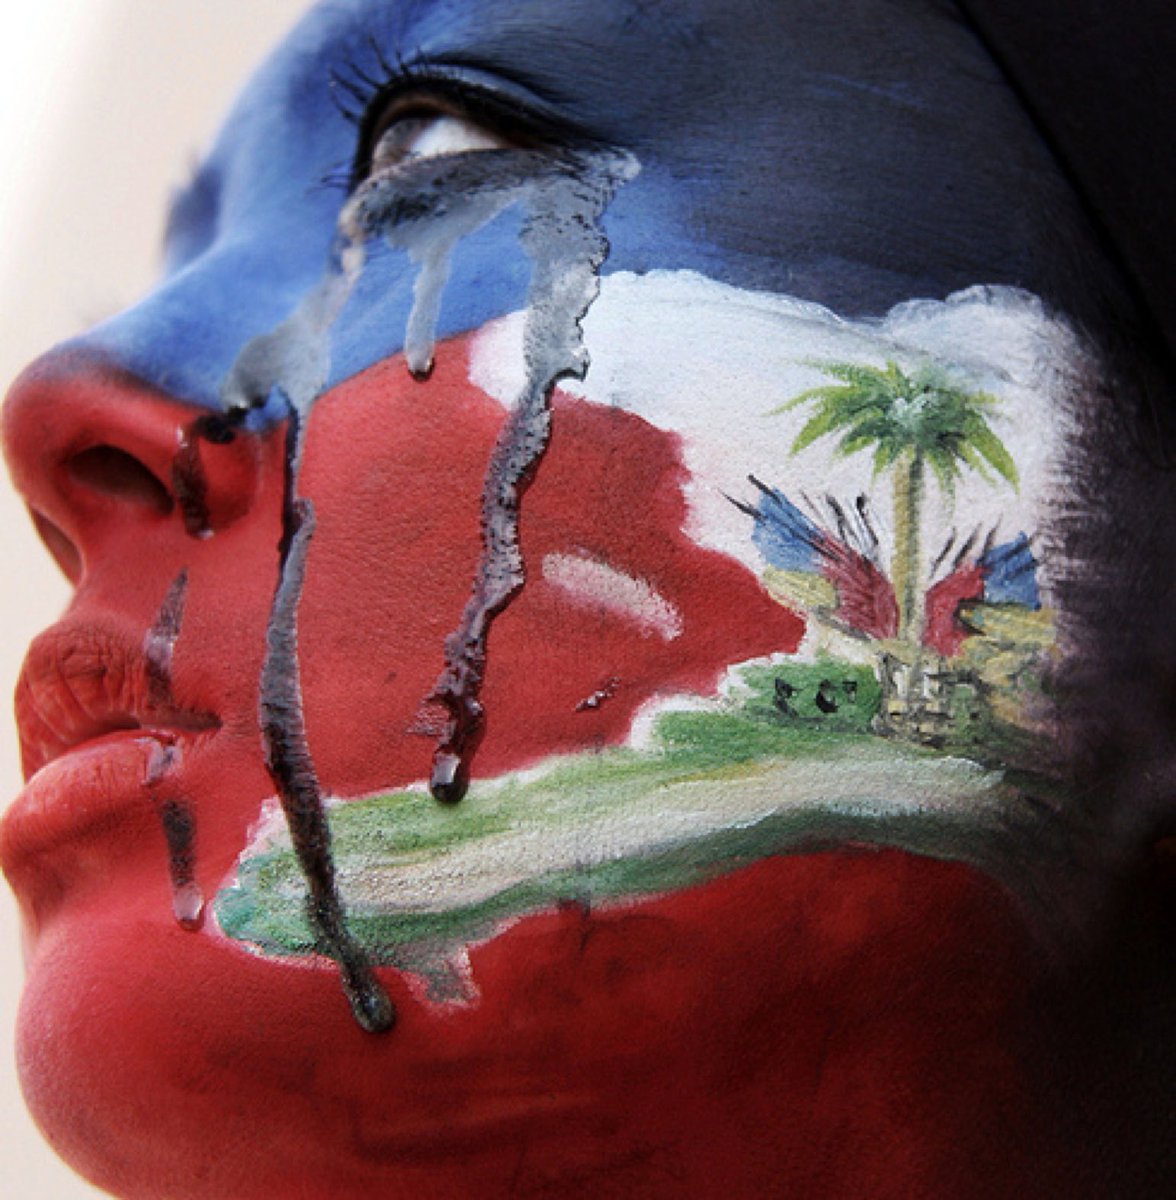 Our prayers and hope goes to all of Haiti during these difficult times. #HaitiStrong @Nyack_Schools